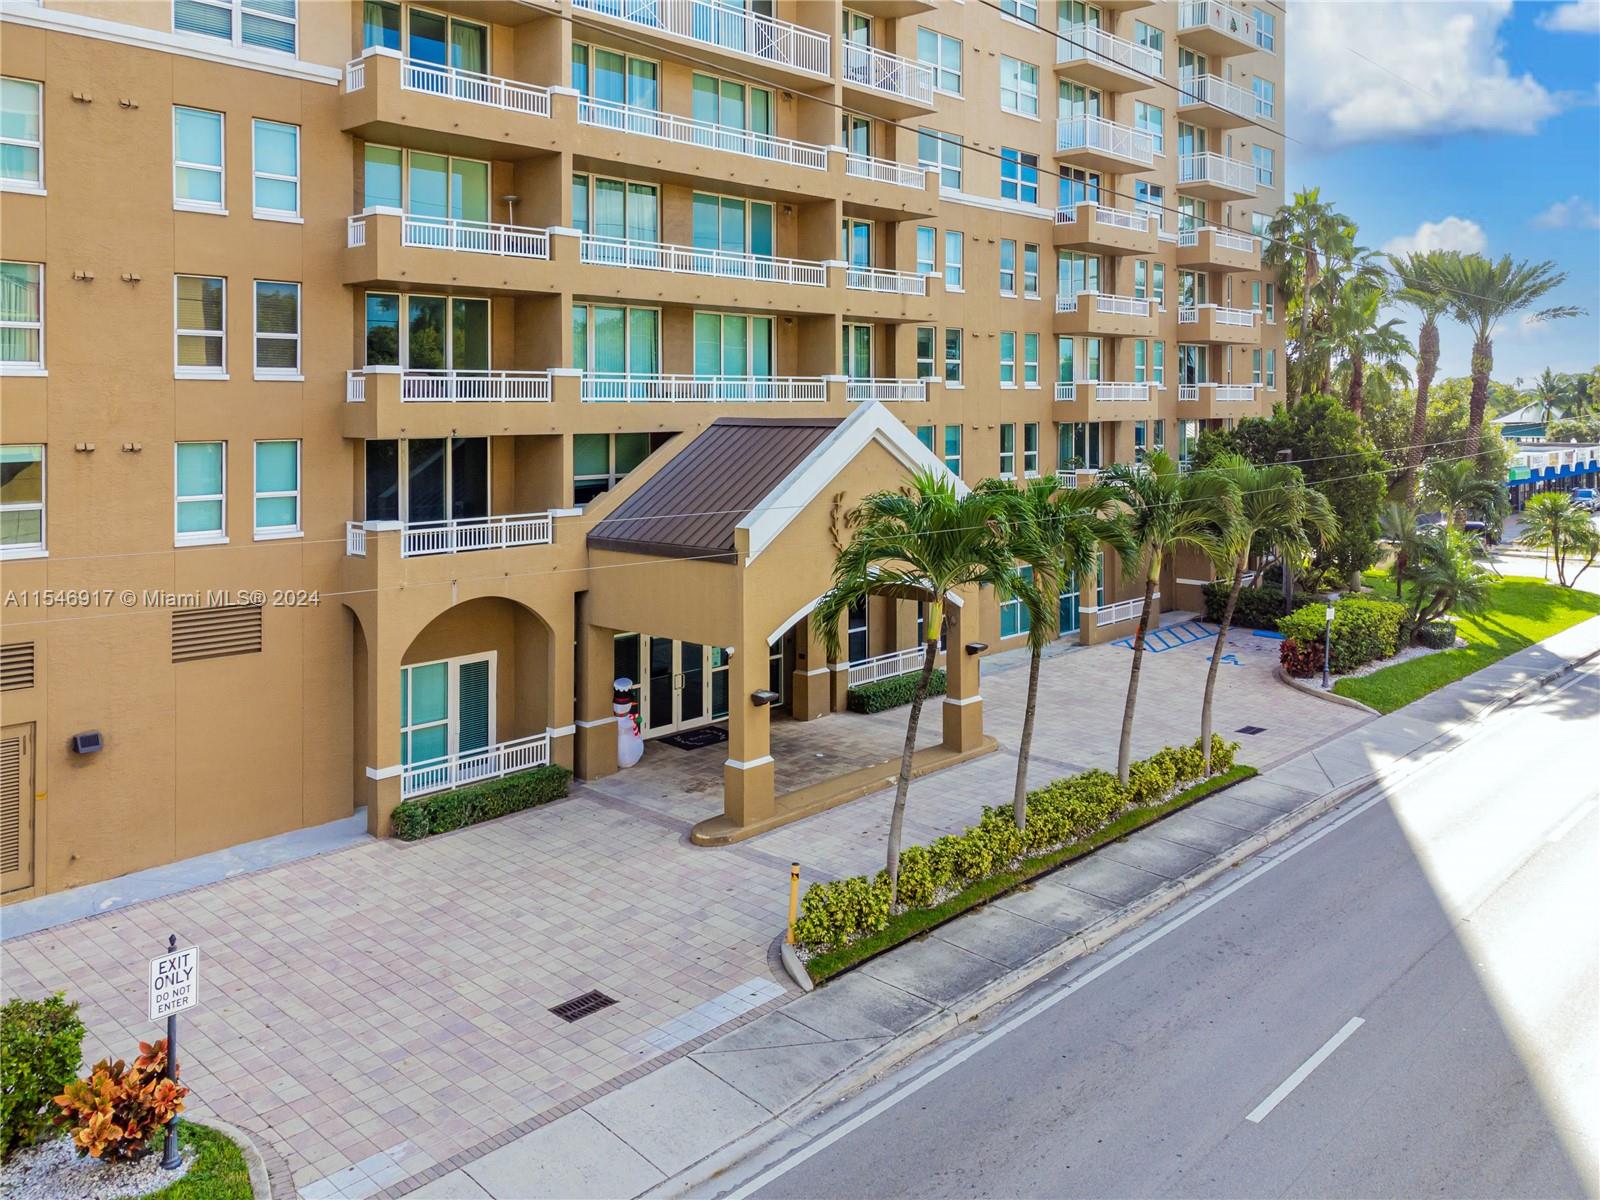 Great and completely upgraded unit available at Davinci! This 2/2 corner unit has 2 balconies overlooking Coral Gables and Coconut Grove, it's been freshly painted and all the appliances are brand new including the washer and the dryer full size. Both rooms are spacious with walking closets. Davinci is a great building in the heart of Miami close to the airport, Miracle Mile, Brickell, and the metro rail among others.